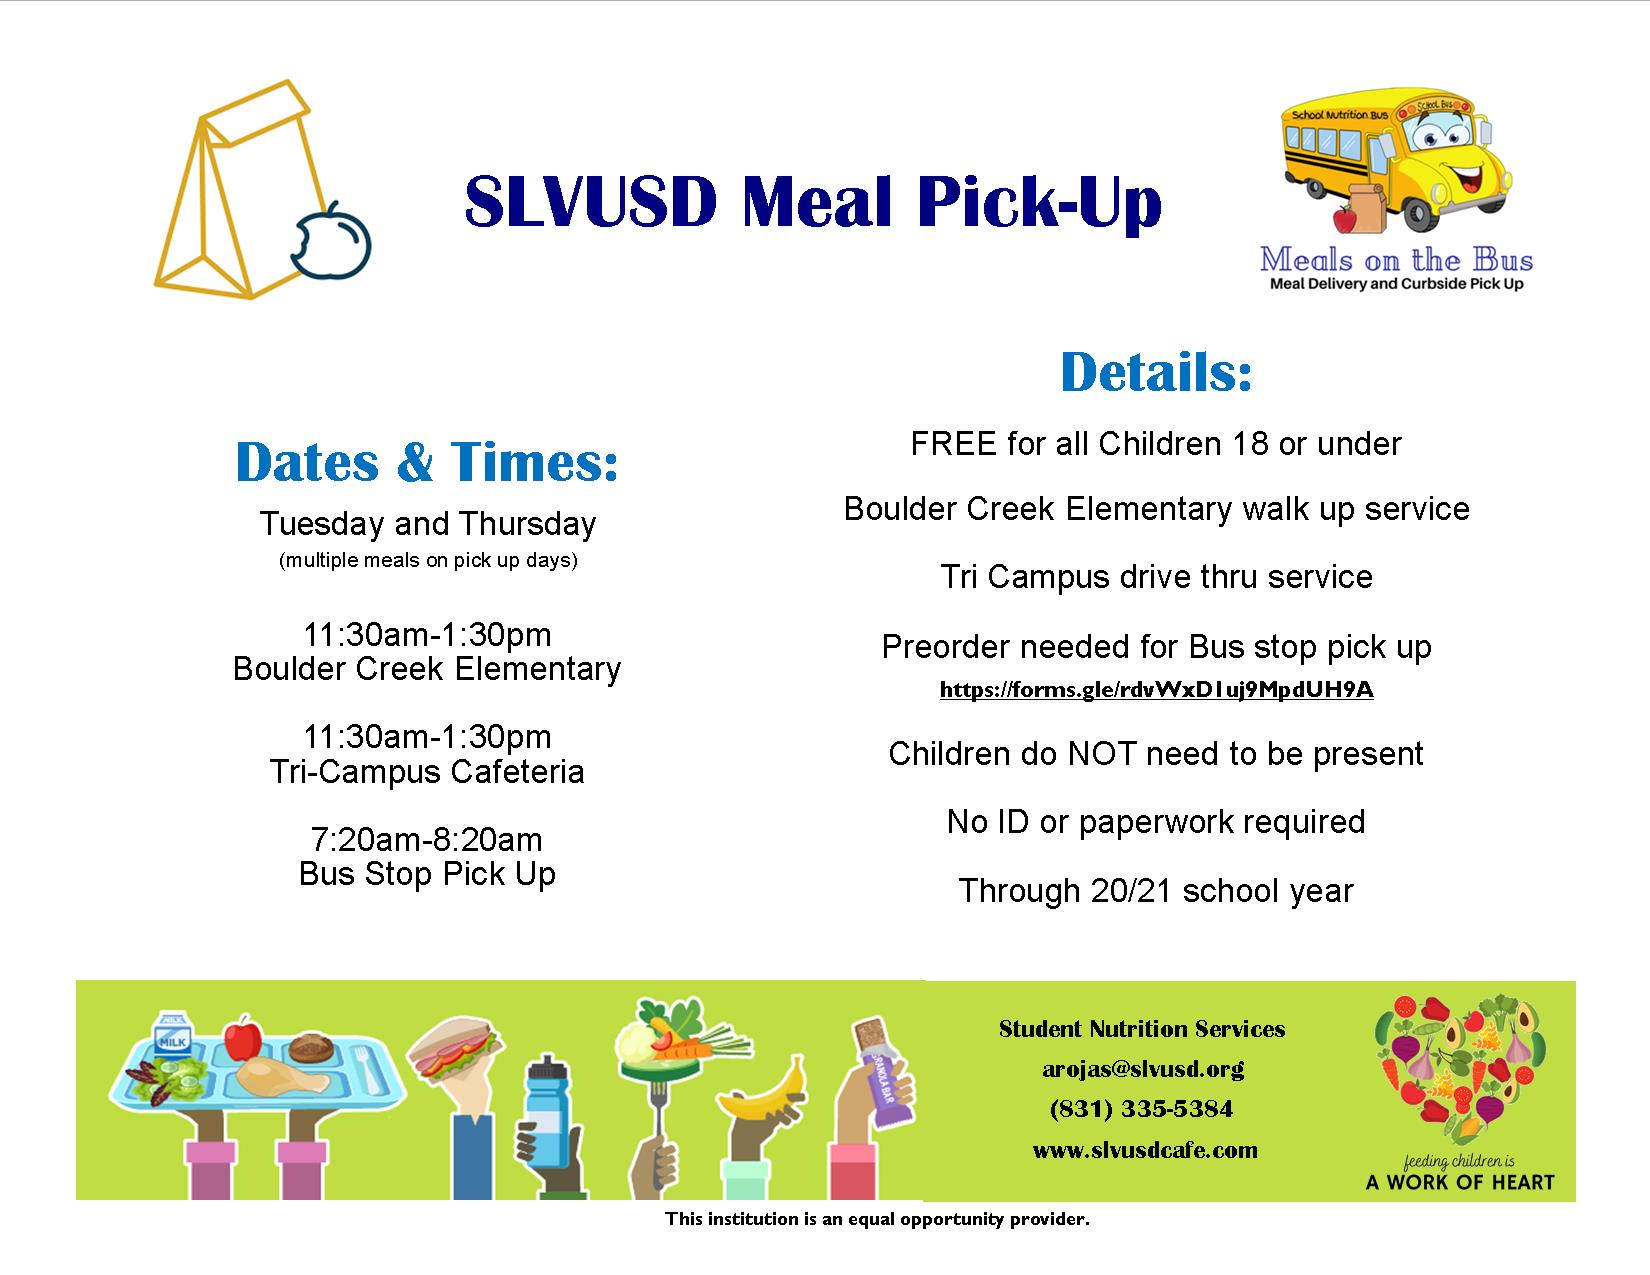 Meal Pick-up; call 831-335-5384 for information